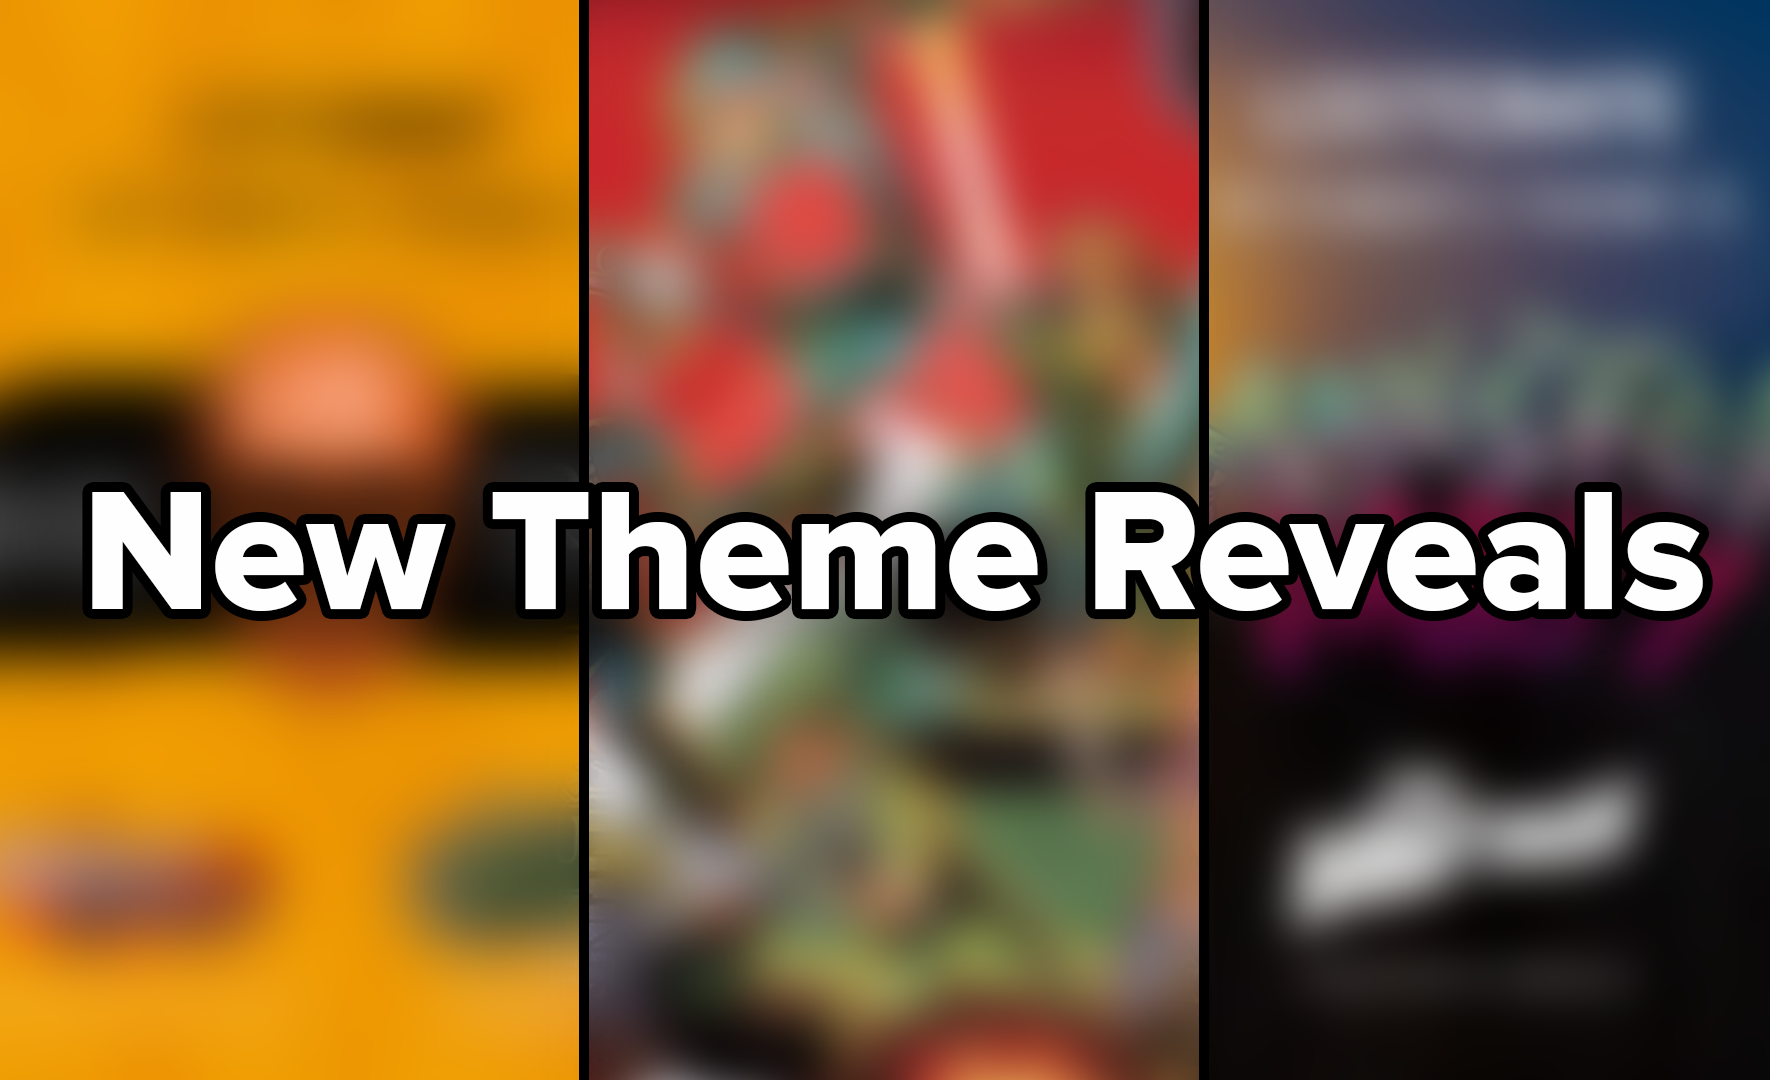 THEME REVEAL: New Loot Wear, Loot Crate, and Loot Crate DX!